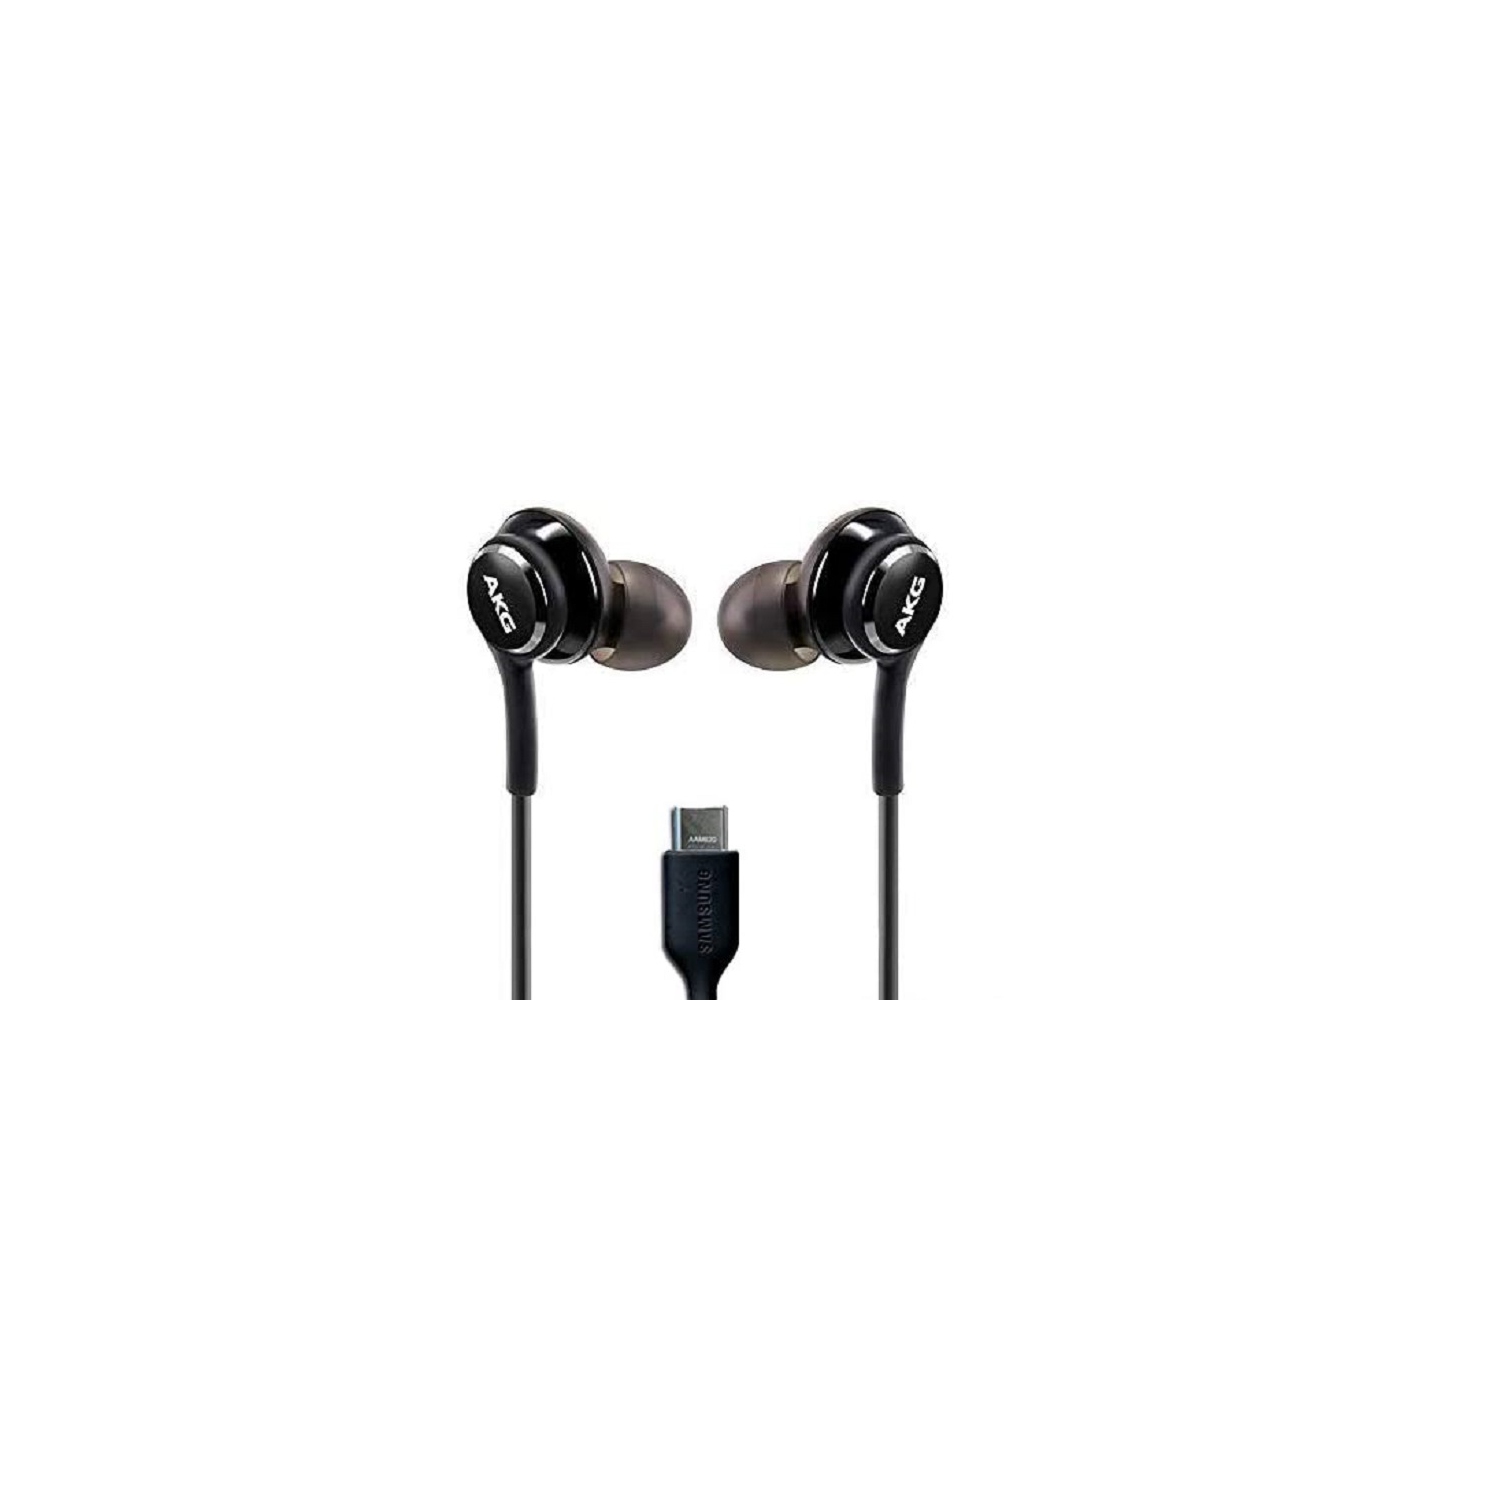 (3 pack) Headphones/Headset for Samsung Galaxy Note 10 Note 10+ S10 Plus S9 Note 8 S9+ S10e S10 with Type-C jack - Designed by AKG - with Microphone (Black) USB-C Connector